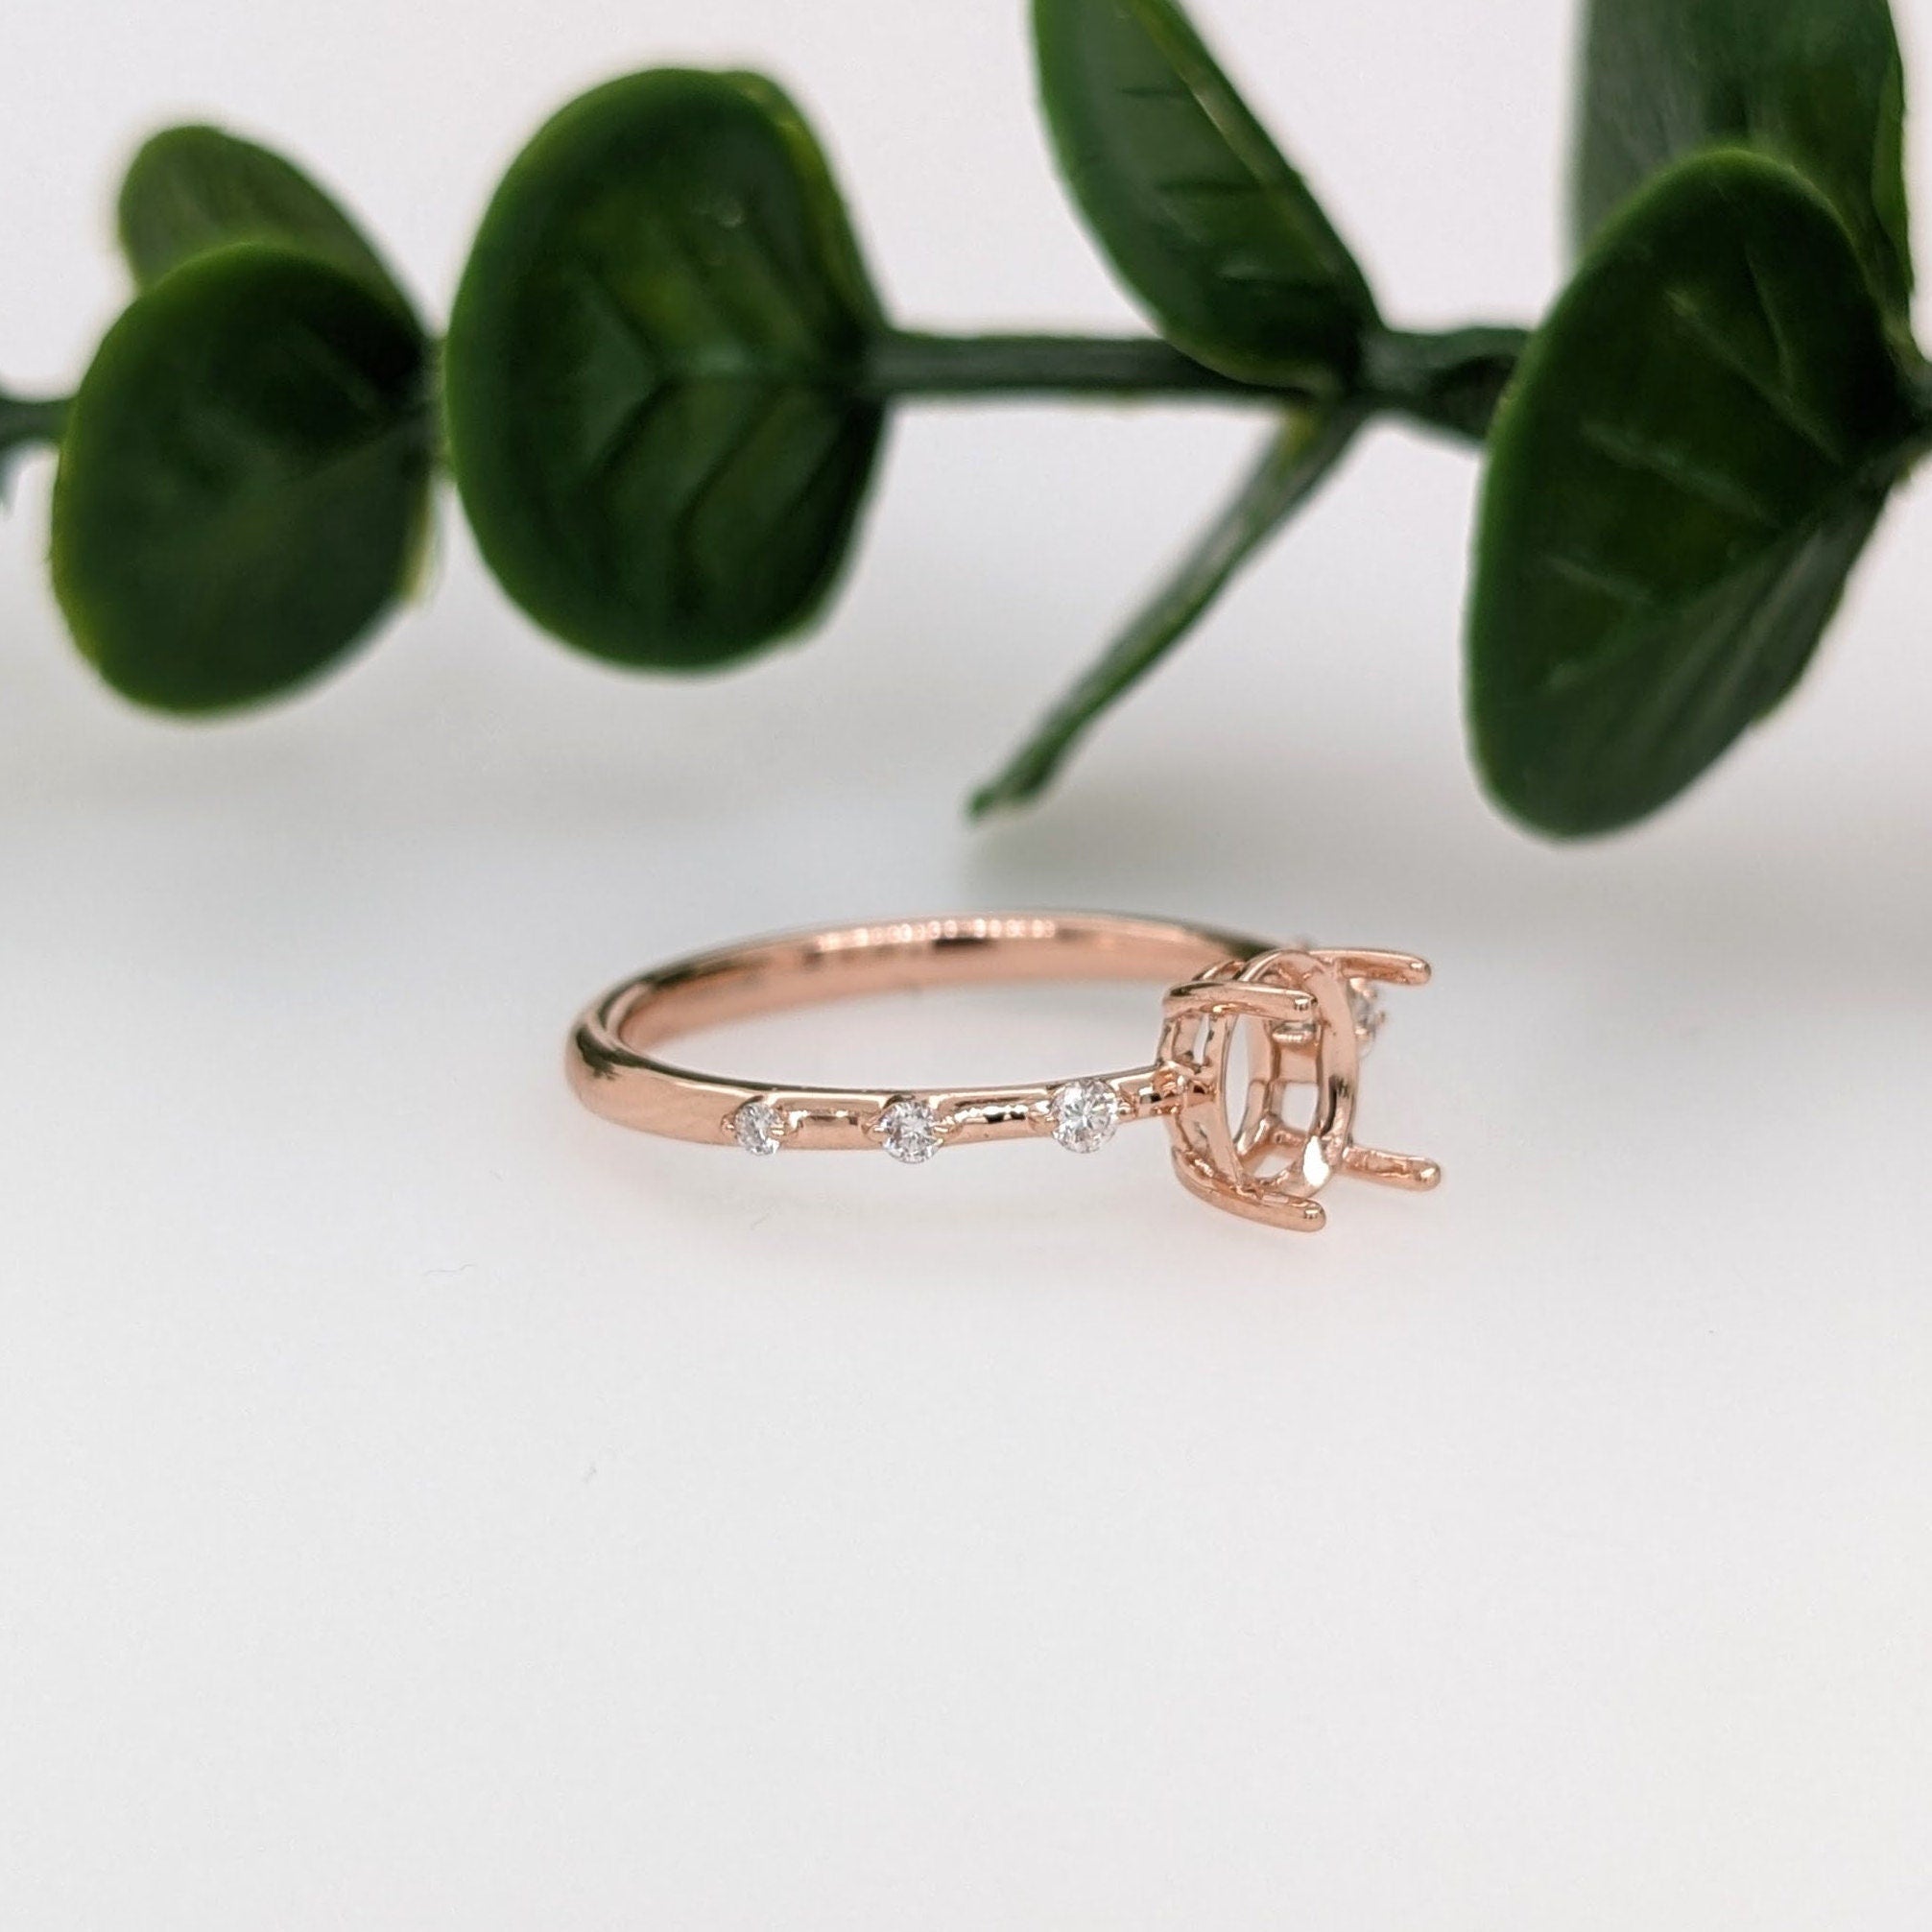 Statement Rings-Classic Solitaire Ring Setting with Minimalist Trio Diamond Accented Shank 14K Gold | Oval 8x6mm | Gemstone Ring Semi Mount | Customizable - NNJGemstones